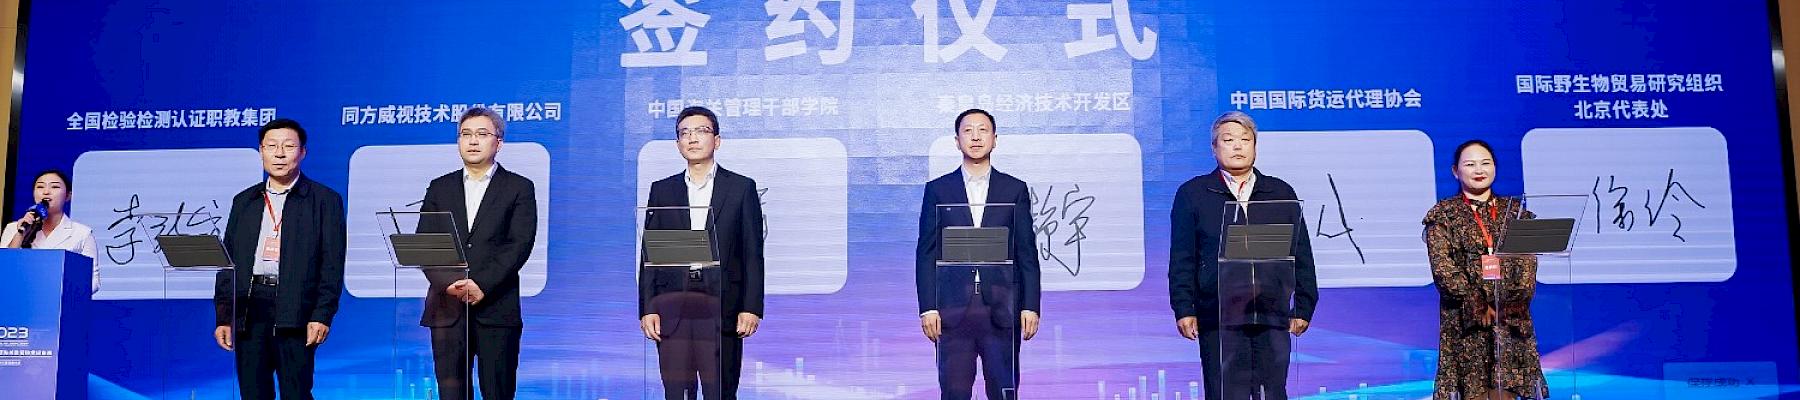 Several organisations electronically signed the MoU at the 2023 Customs Control Technology Development Forum. Image courtesy of Chinese Academy of Customs Administration